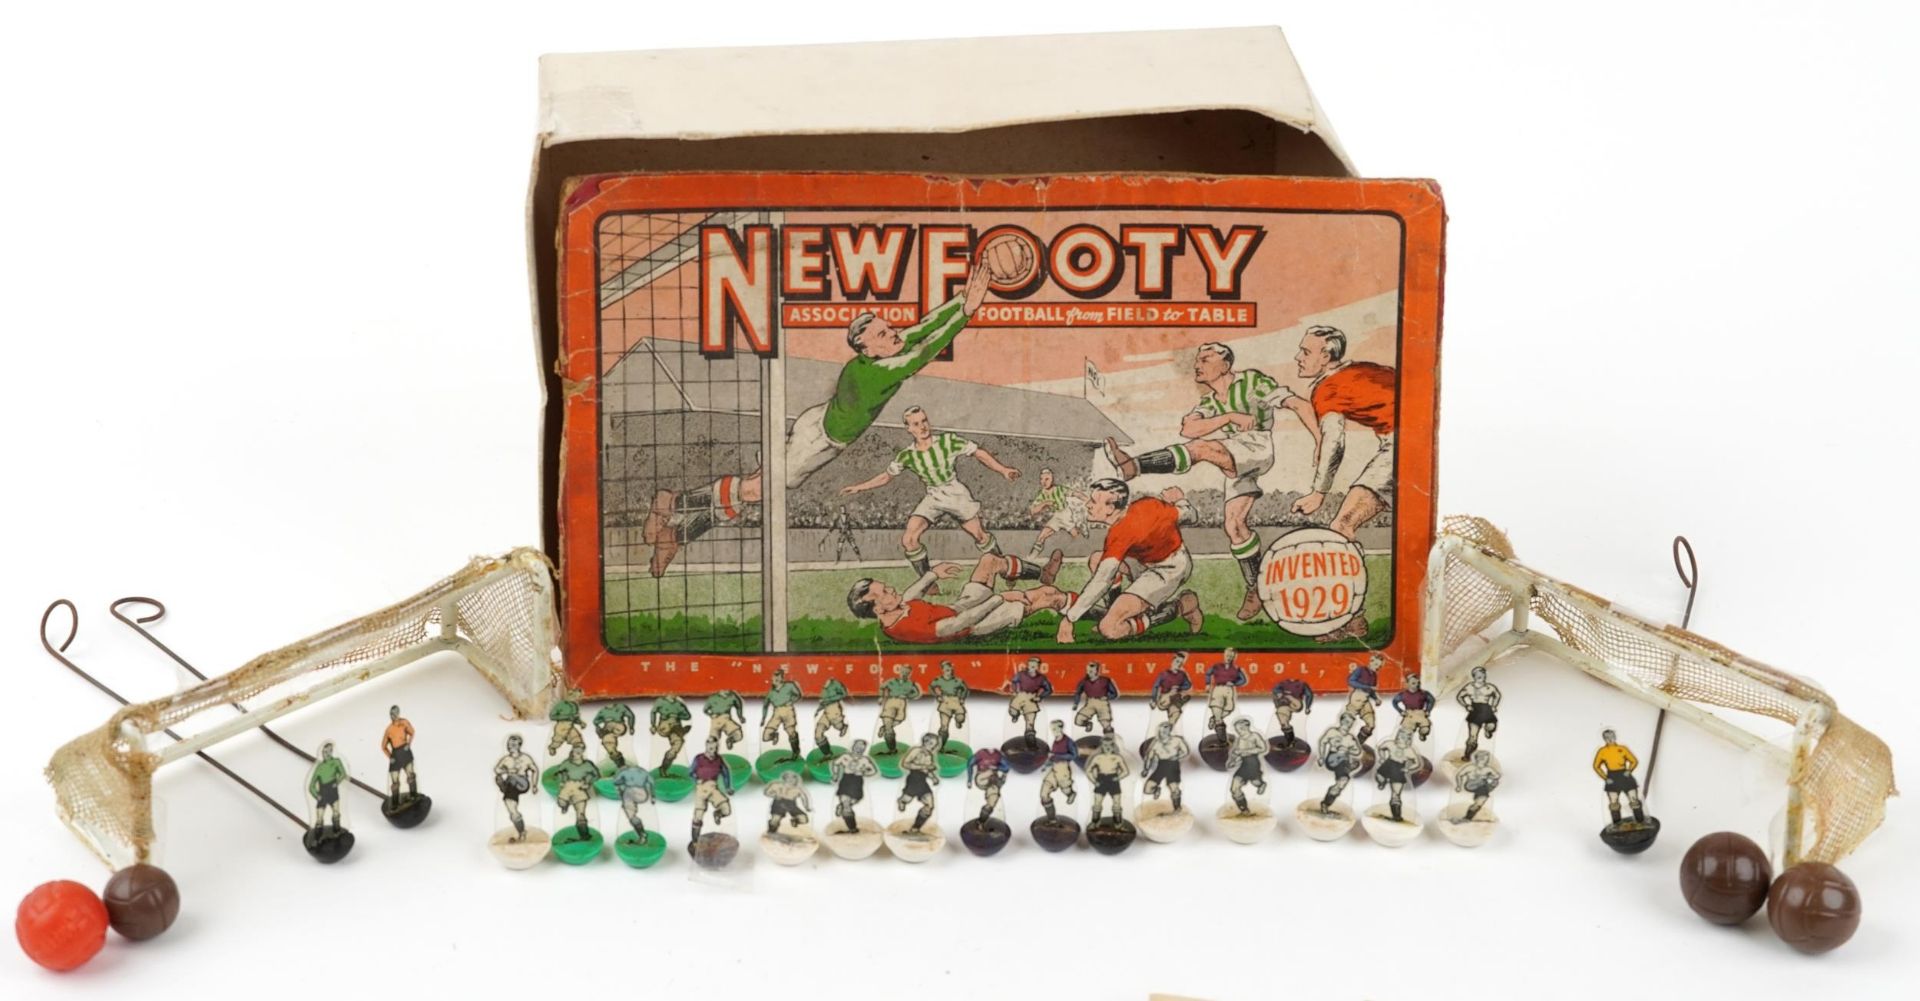 Early 20th century New Footy table soccer game with box and grass by The New Footy Co Liverpool : - Image 4 of 7